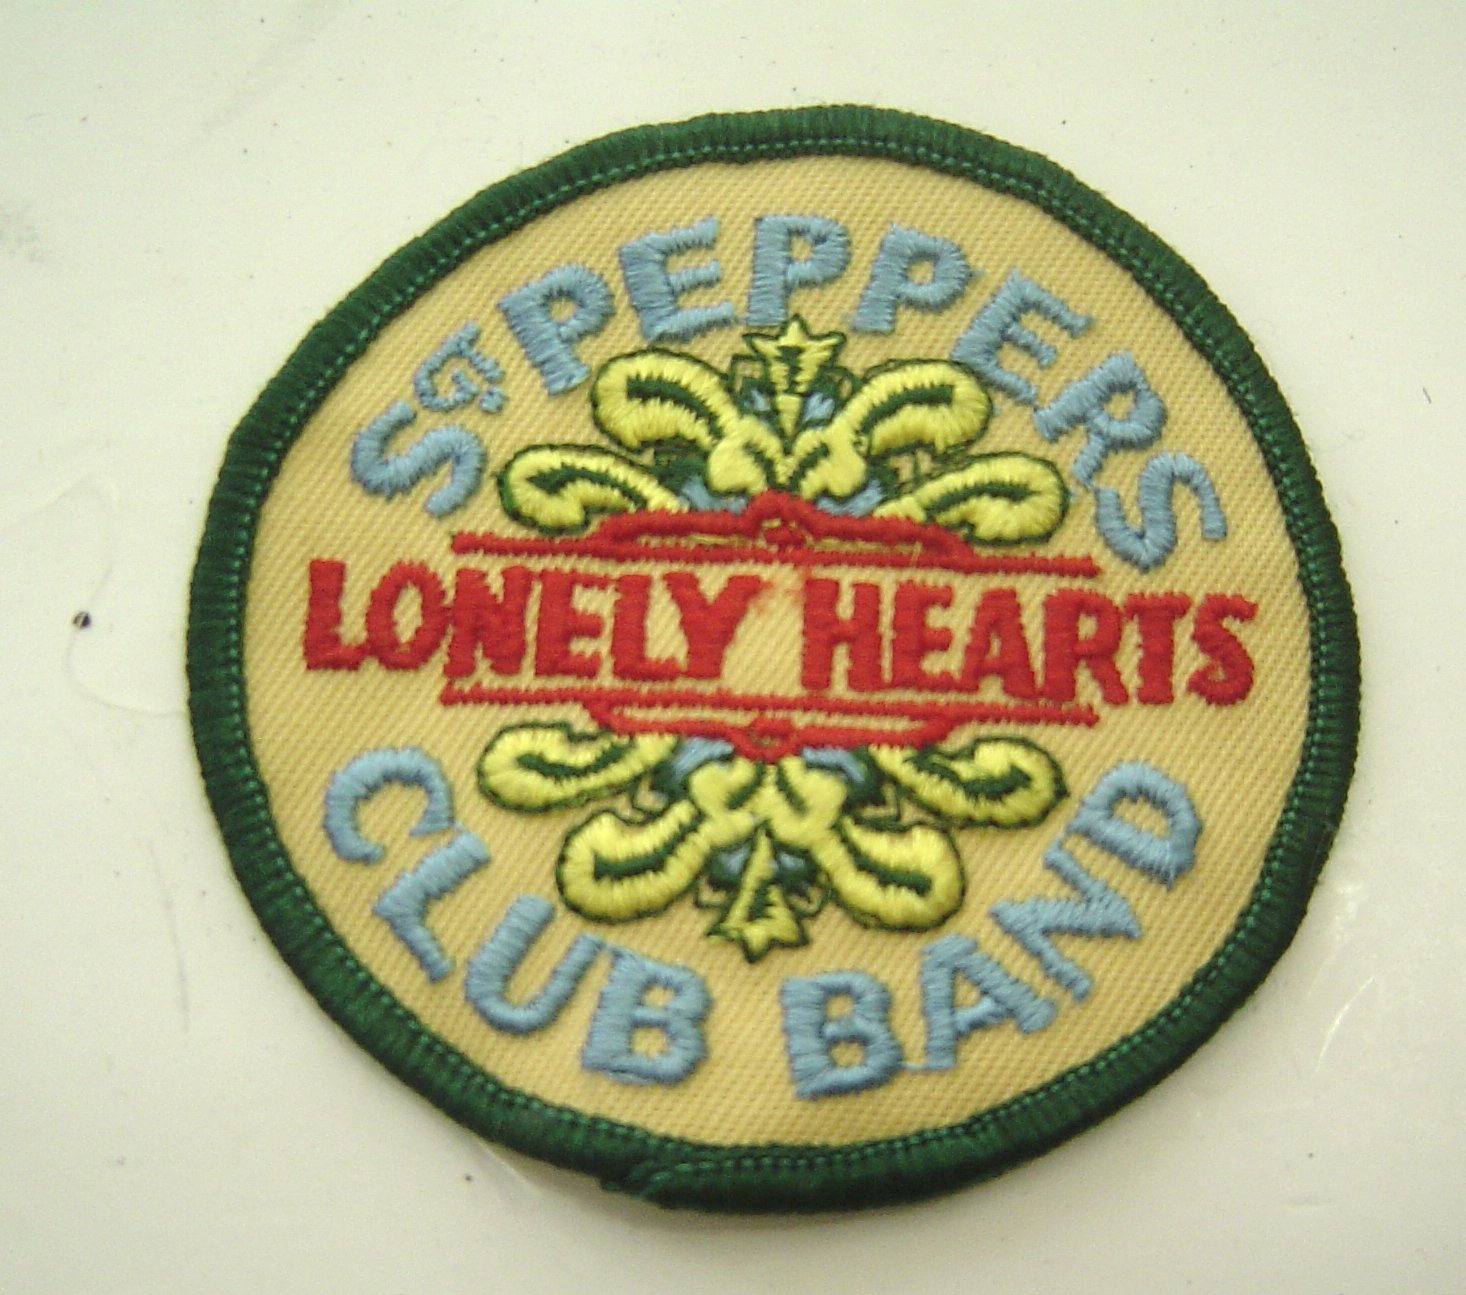  The Beatles 1960's  St. Pepper Lonely Hearts Club Band Applique Sew-On  Patch   - $24.99